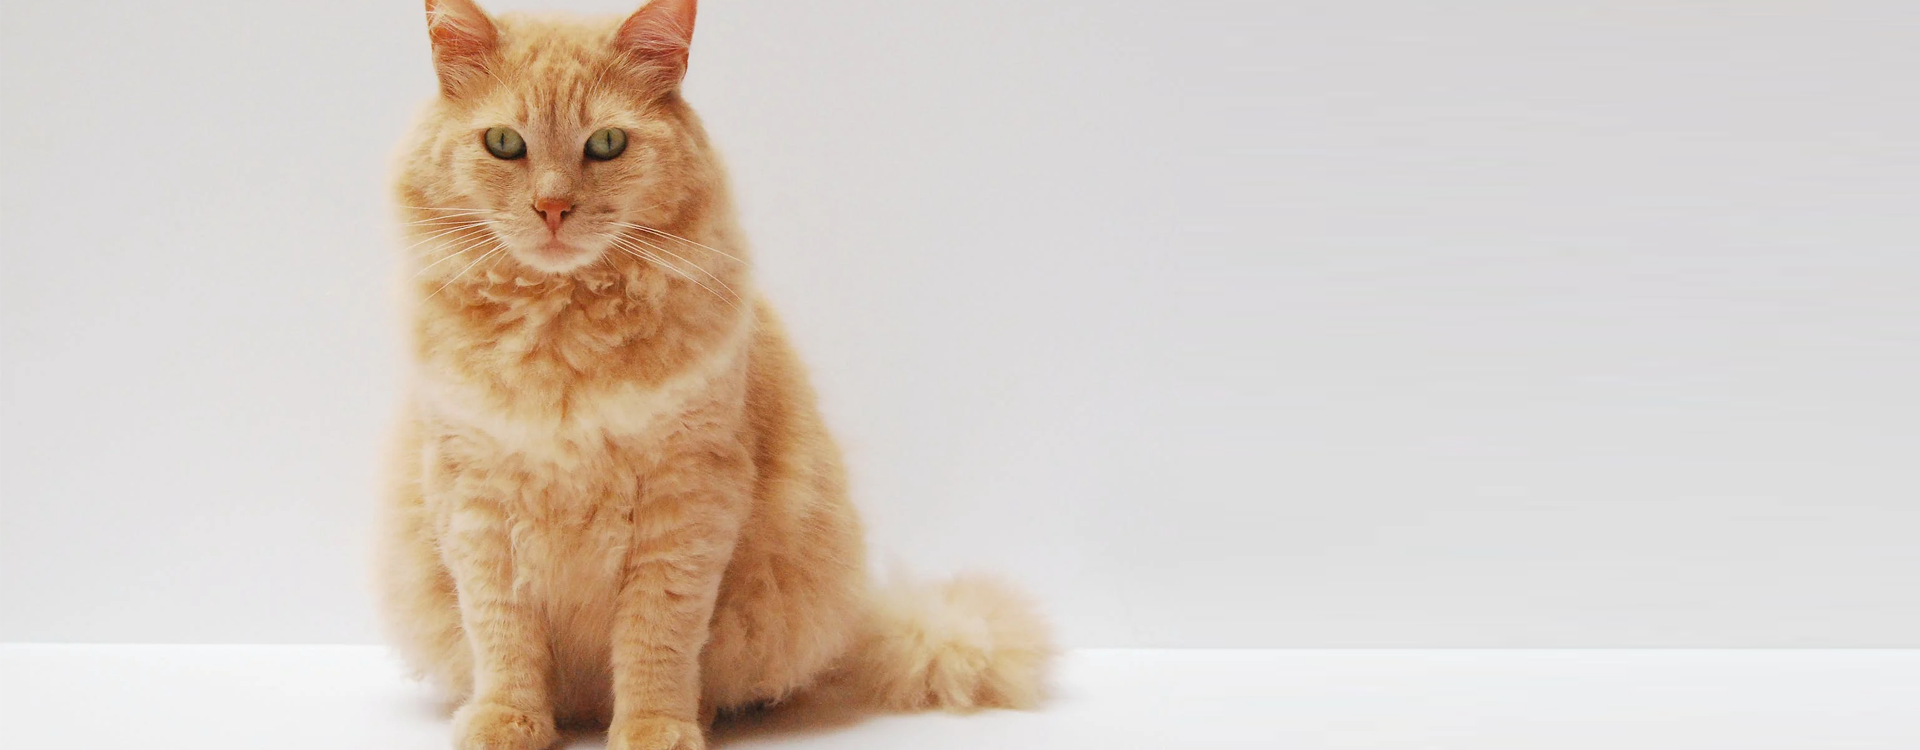 How Coolcatss helps overweight and obese indoor cats.